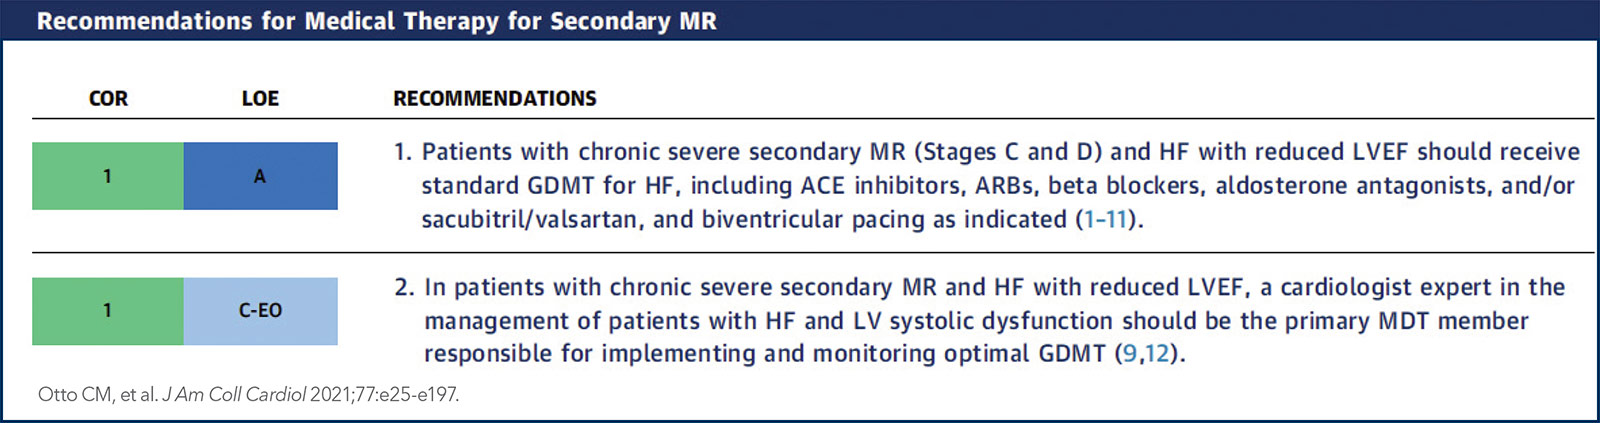 Secondary Mitral Regurgitation: When to Refer, When to Treat and How to Treat?